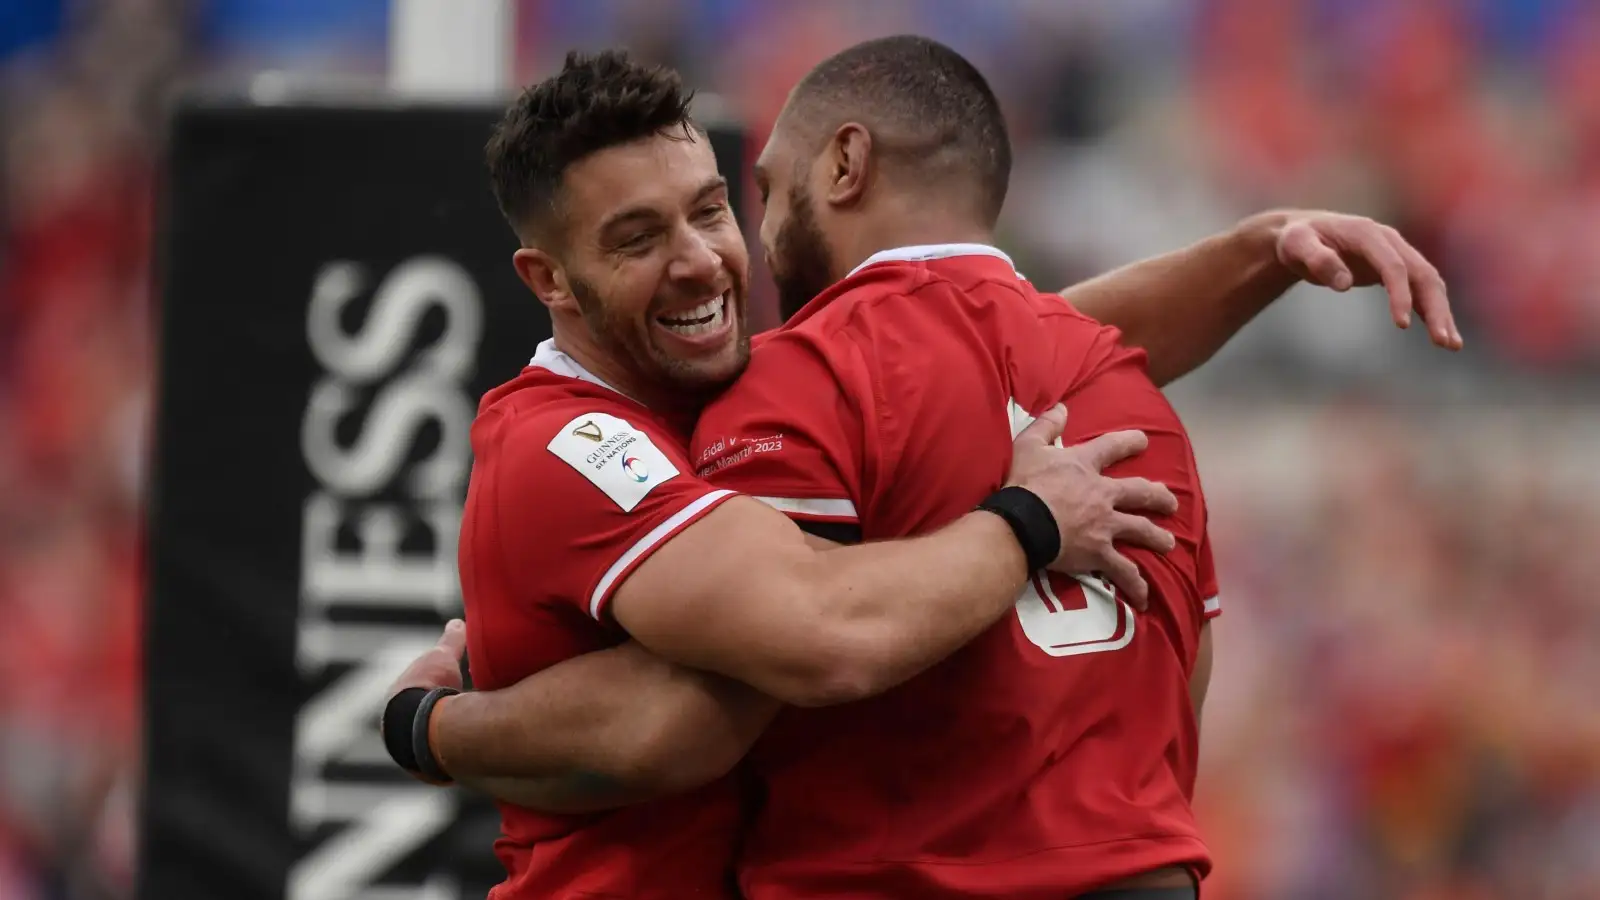 Wales stars Rhys Webb and Taulupe Faletau embrace after a try against Italy